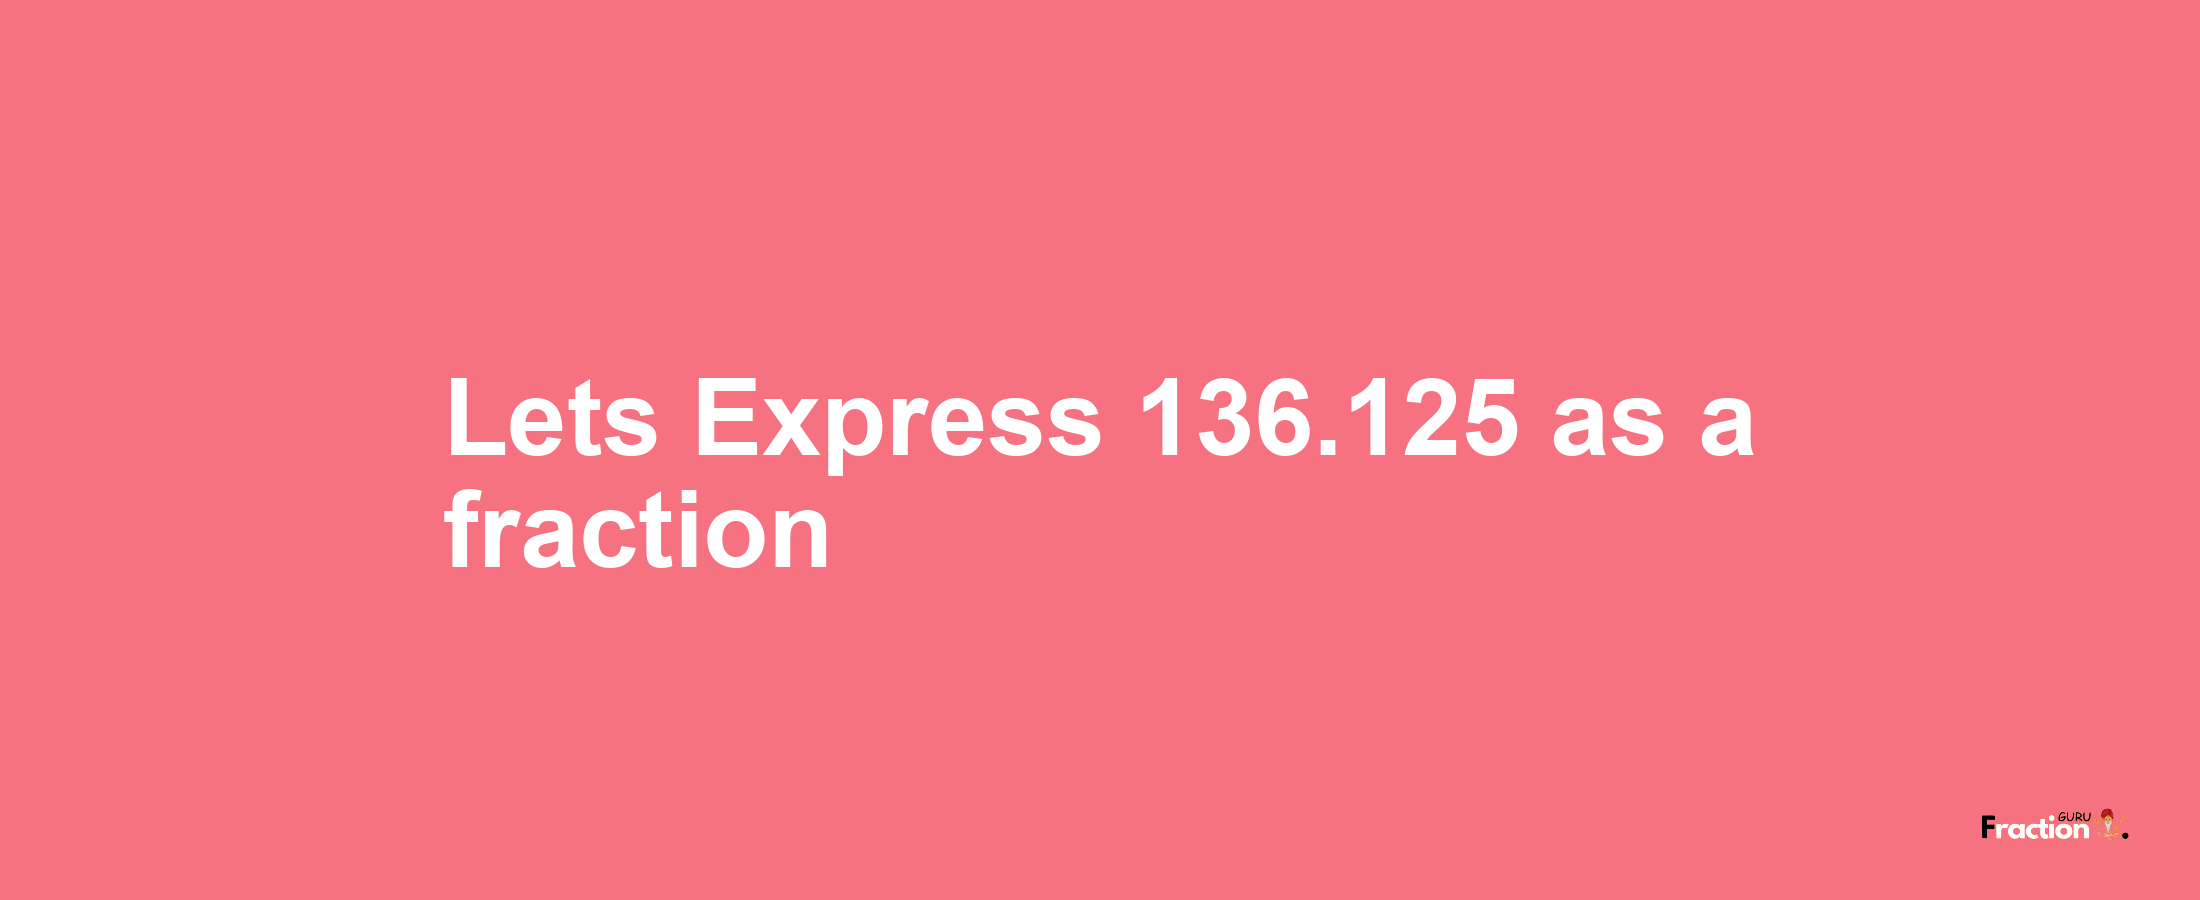 Lets Express 136.125 as afraction